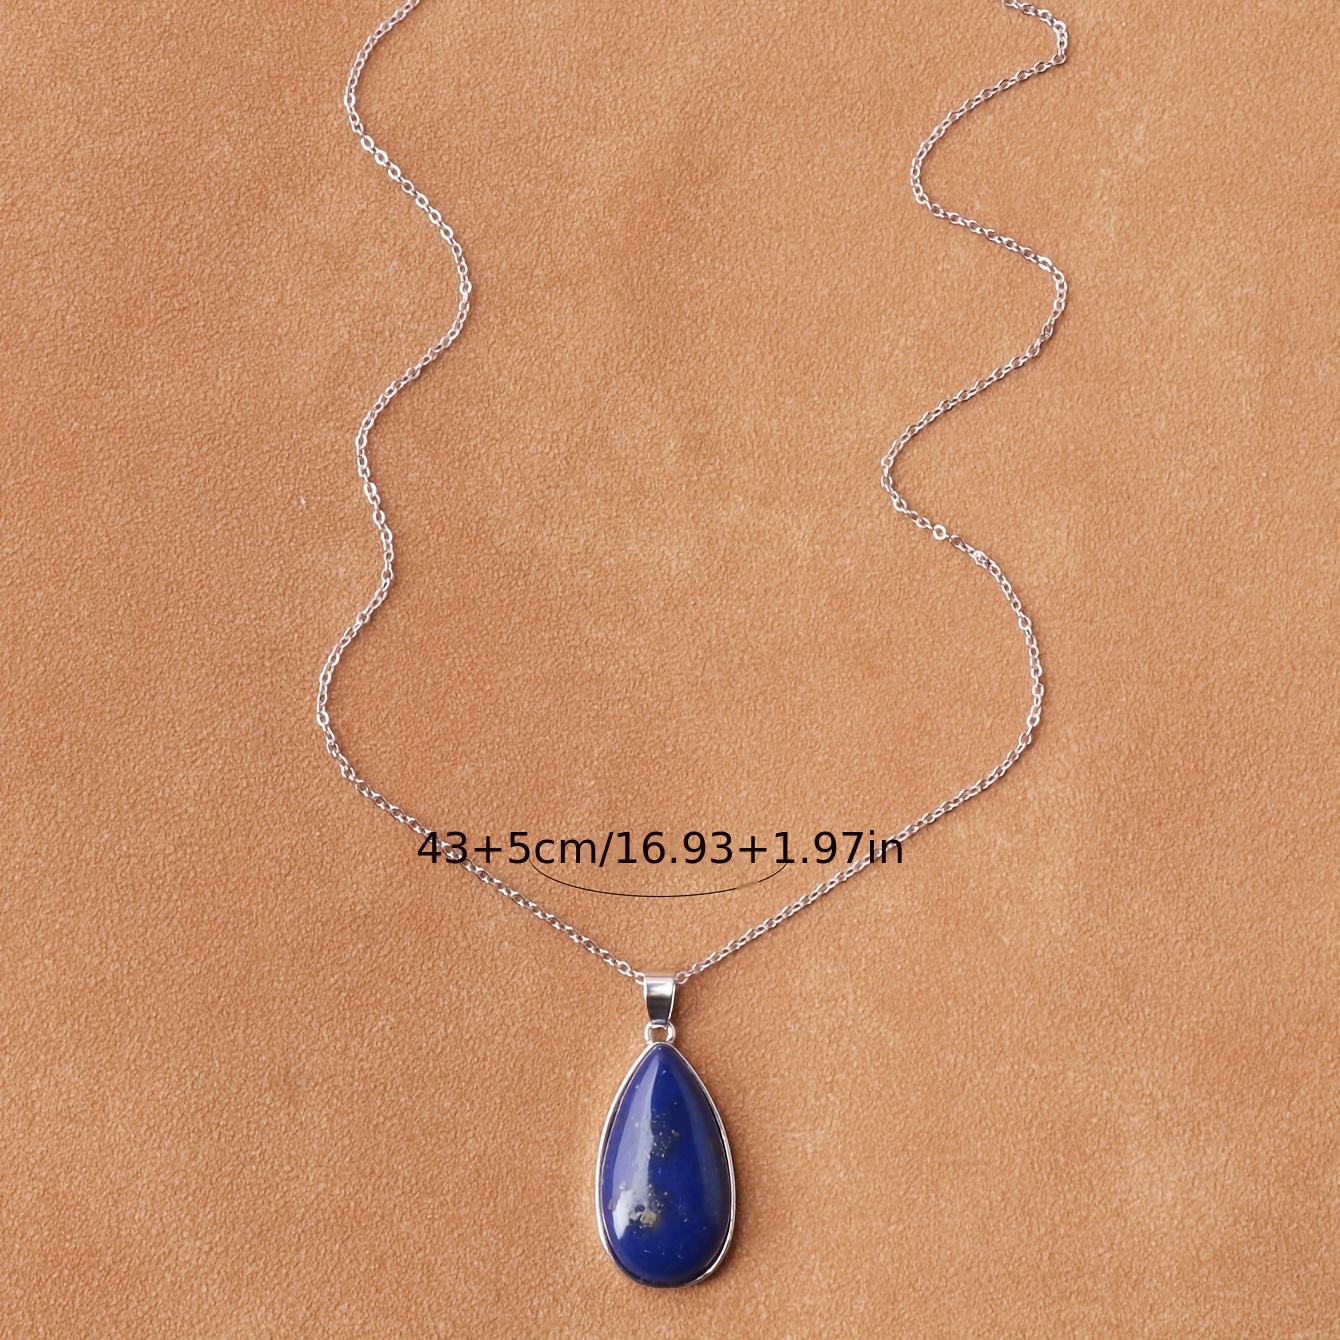 Lapis Lazuli Pendant - Polished Point Pendant with Capped Setting | New  Moon Beginnings